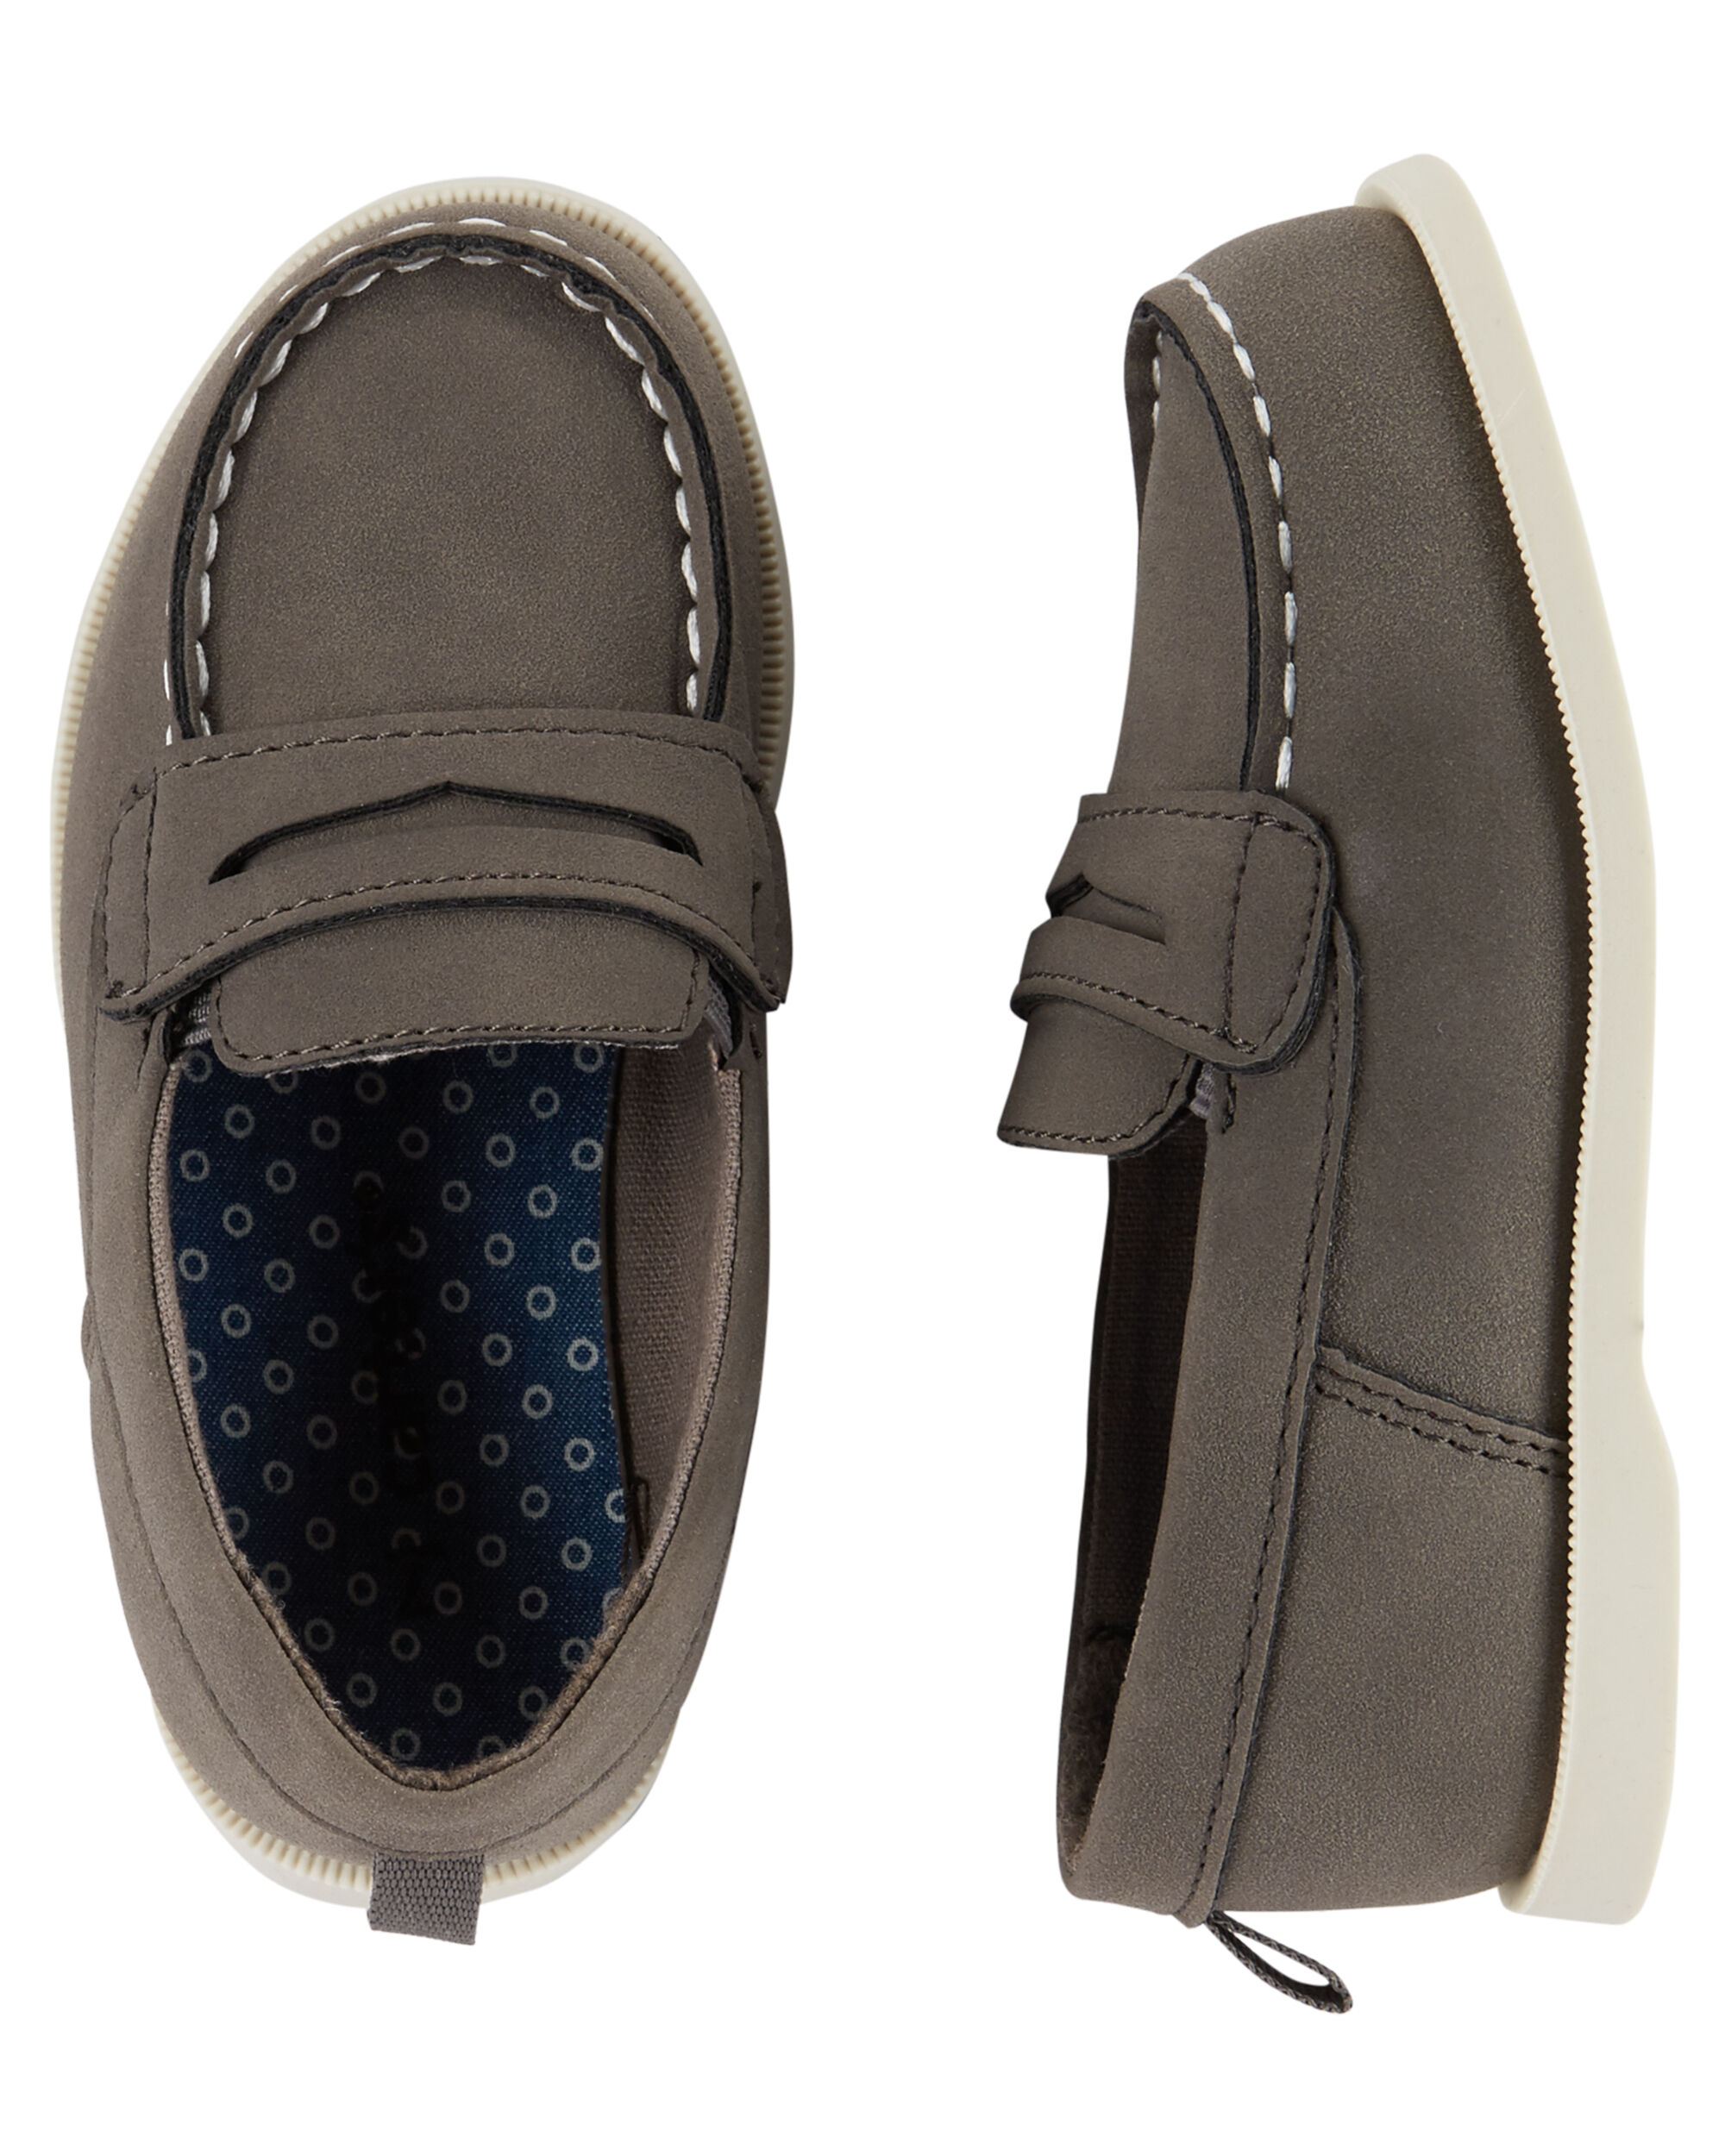 carters loafers